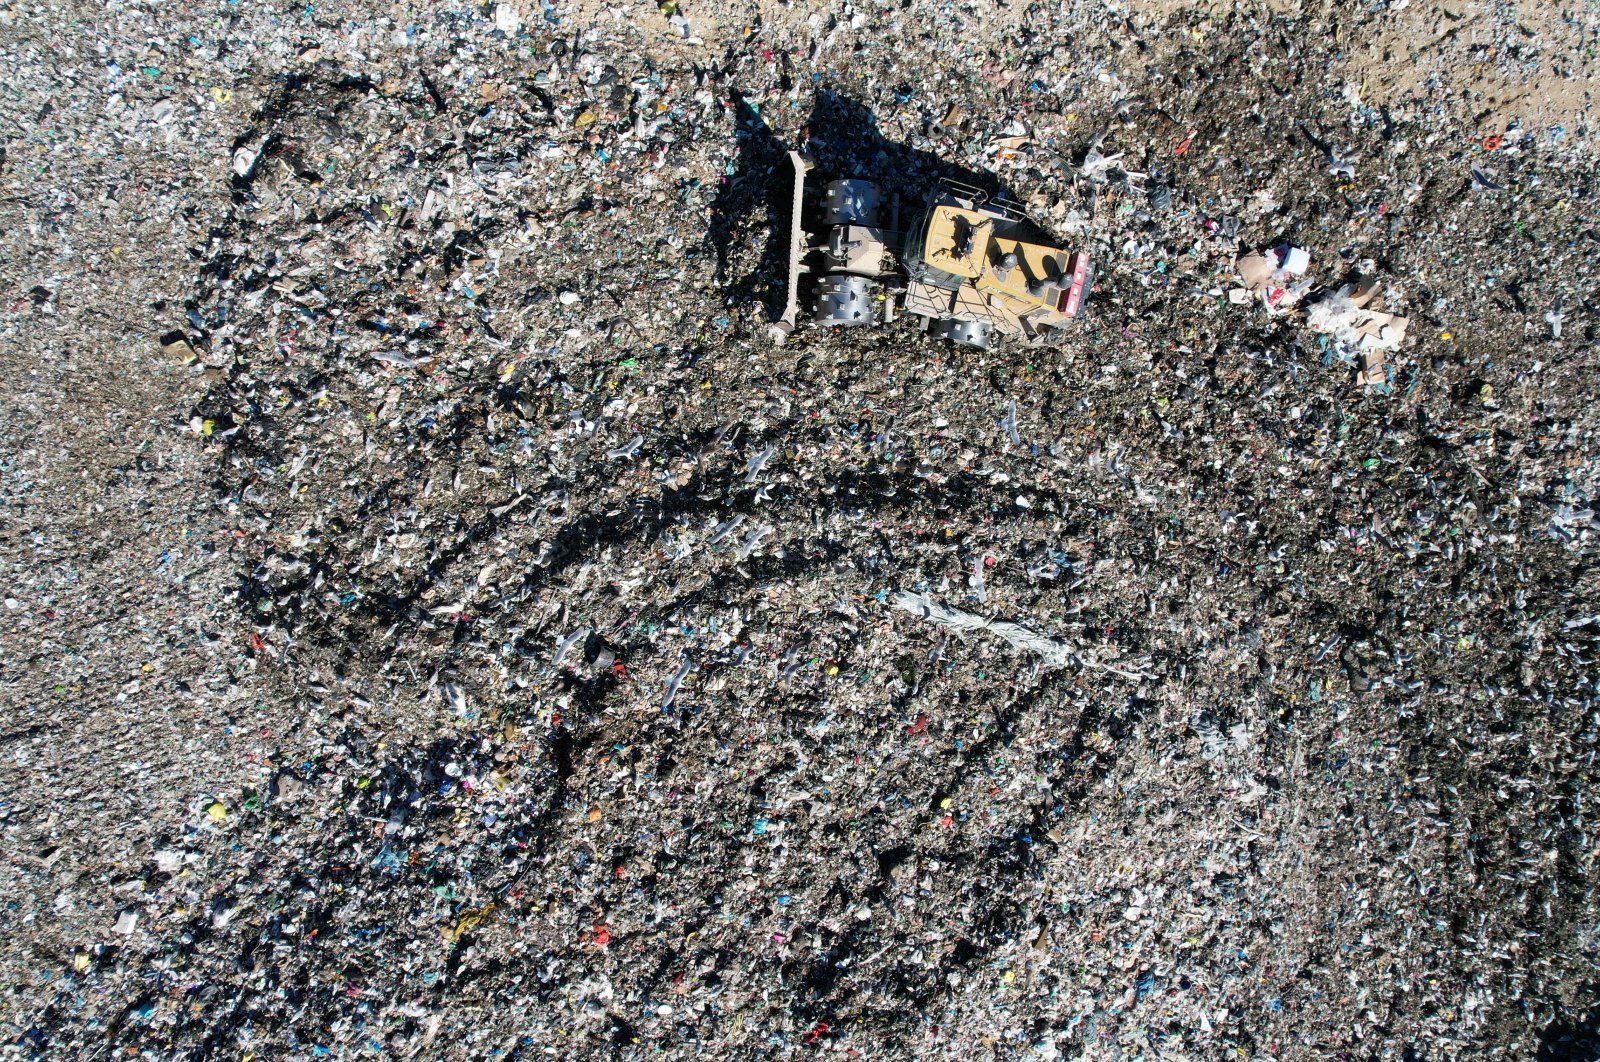 An aerial view shows a digger pushing waste to flatten a hill of rubbish, at a private landfill in Viggianello, on the French Mediterranean island of Corsica, Oct. 5, 2022. (AFP Photo)